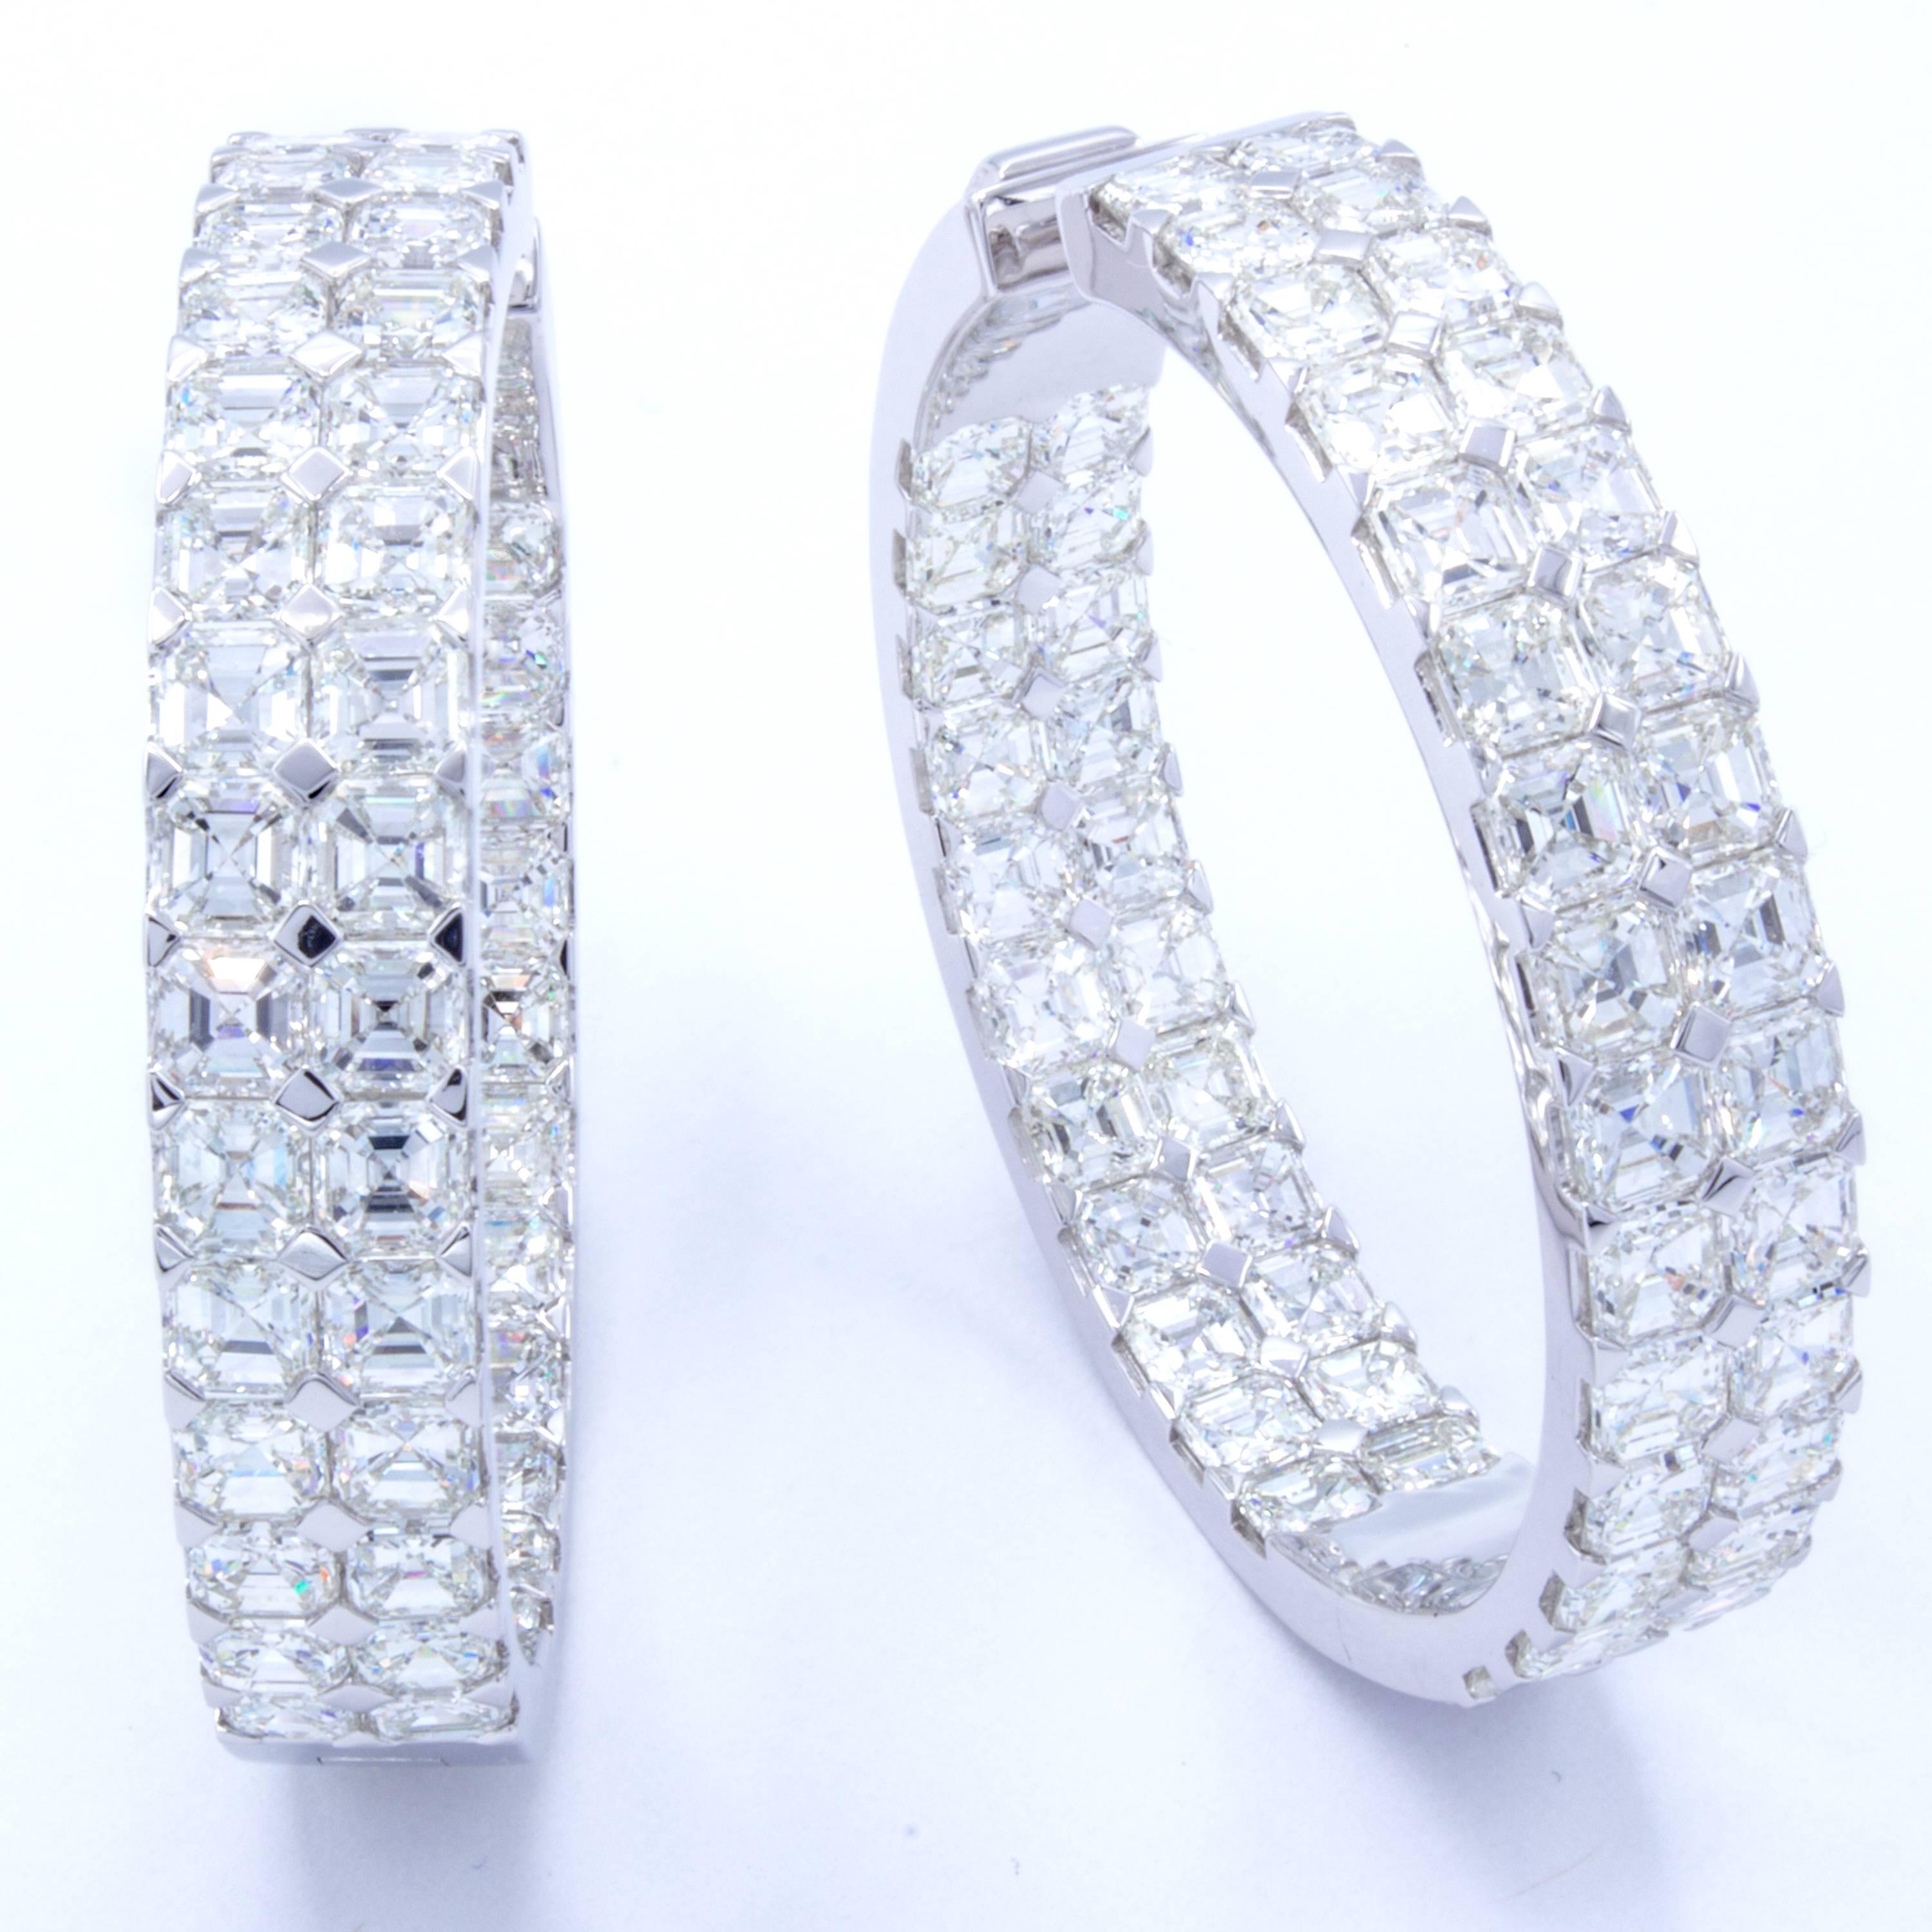 A pair of exceptionally brilliant hoop earrings by Rosenberg Diamonds & Co. The earrings feature over 20 carats worth of collection quality Asscher cut diamonds set into 18Kt white gold. The diamonds span both the outside and the inside of the